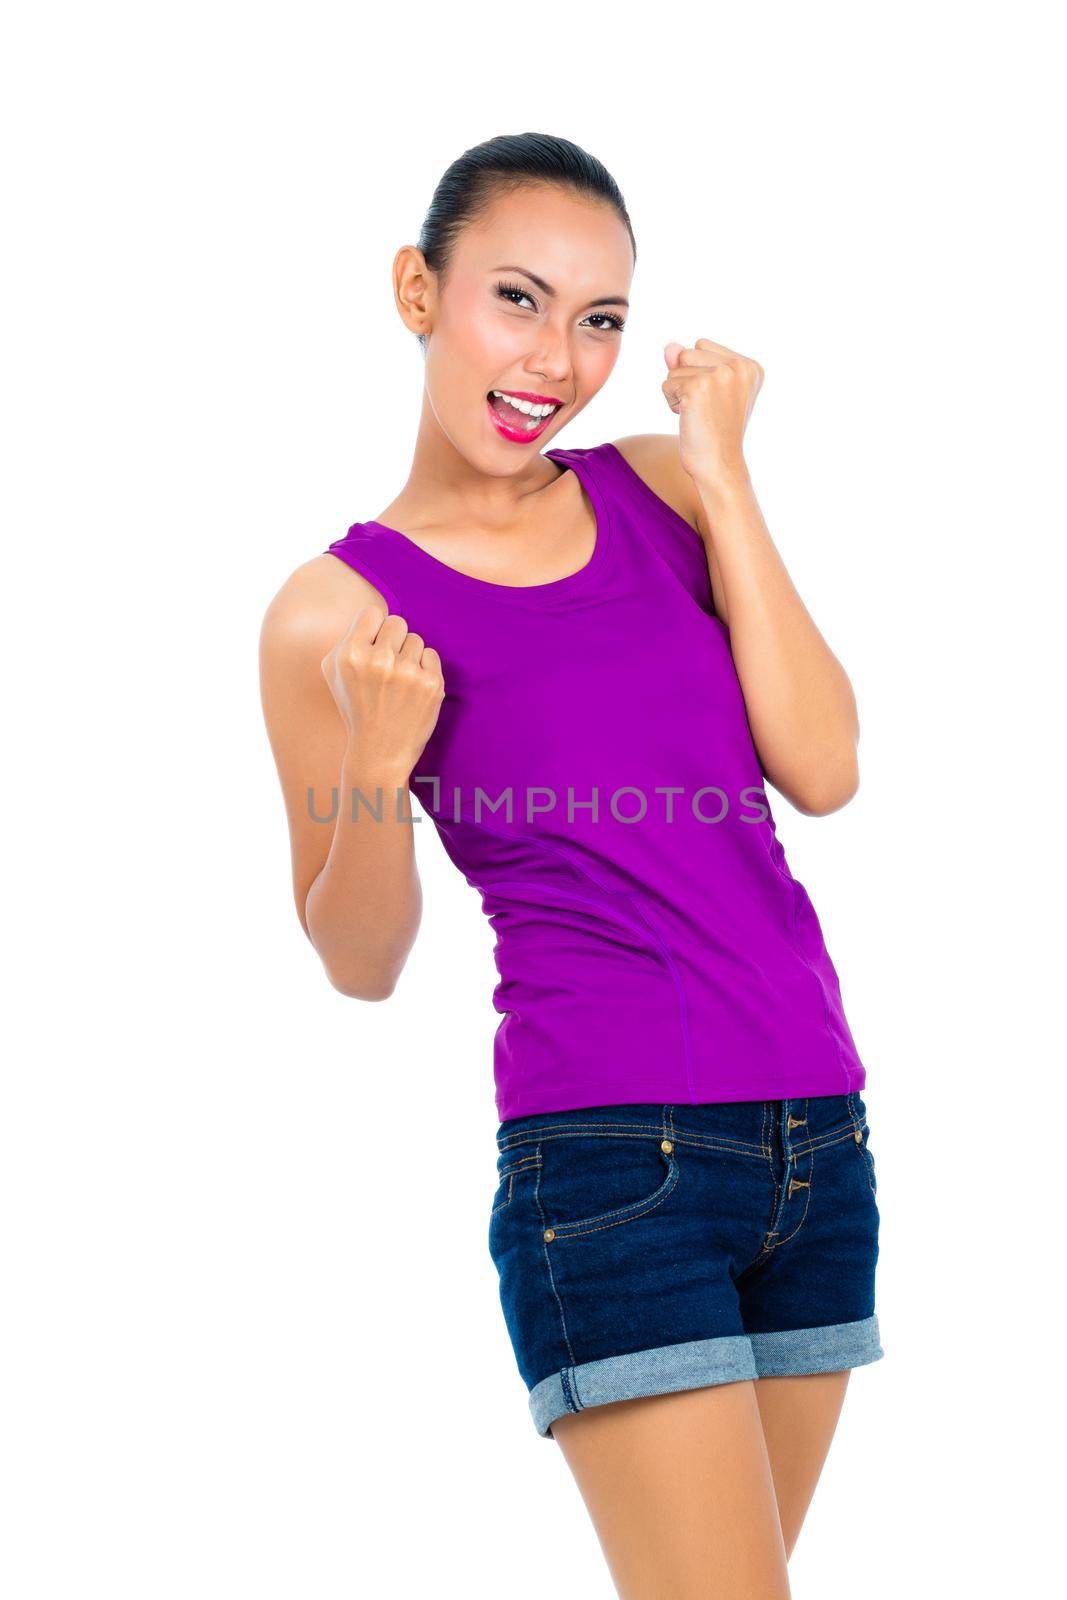 Smiling woman clenching her fist by Kzenon